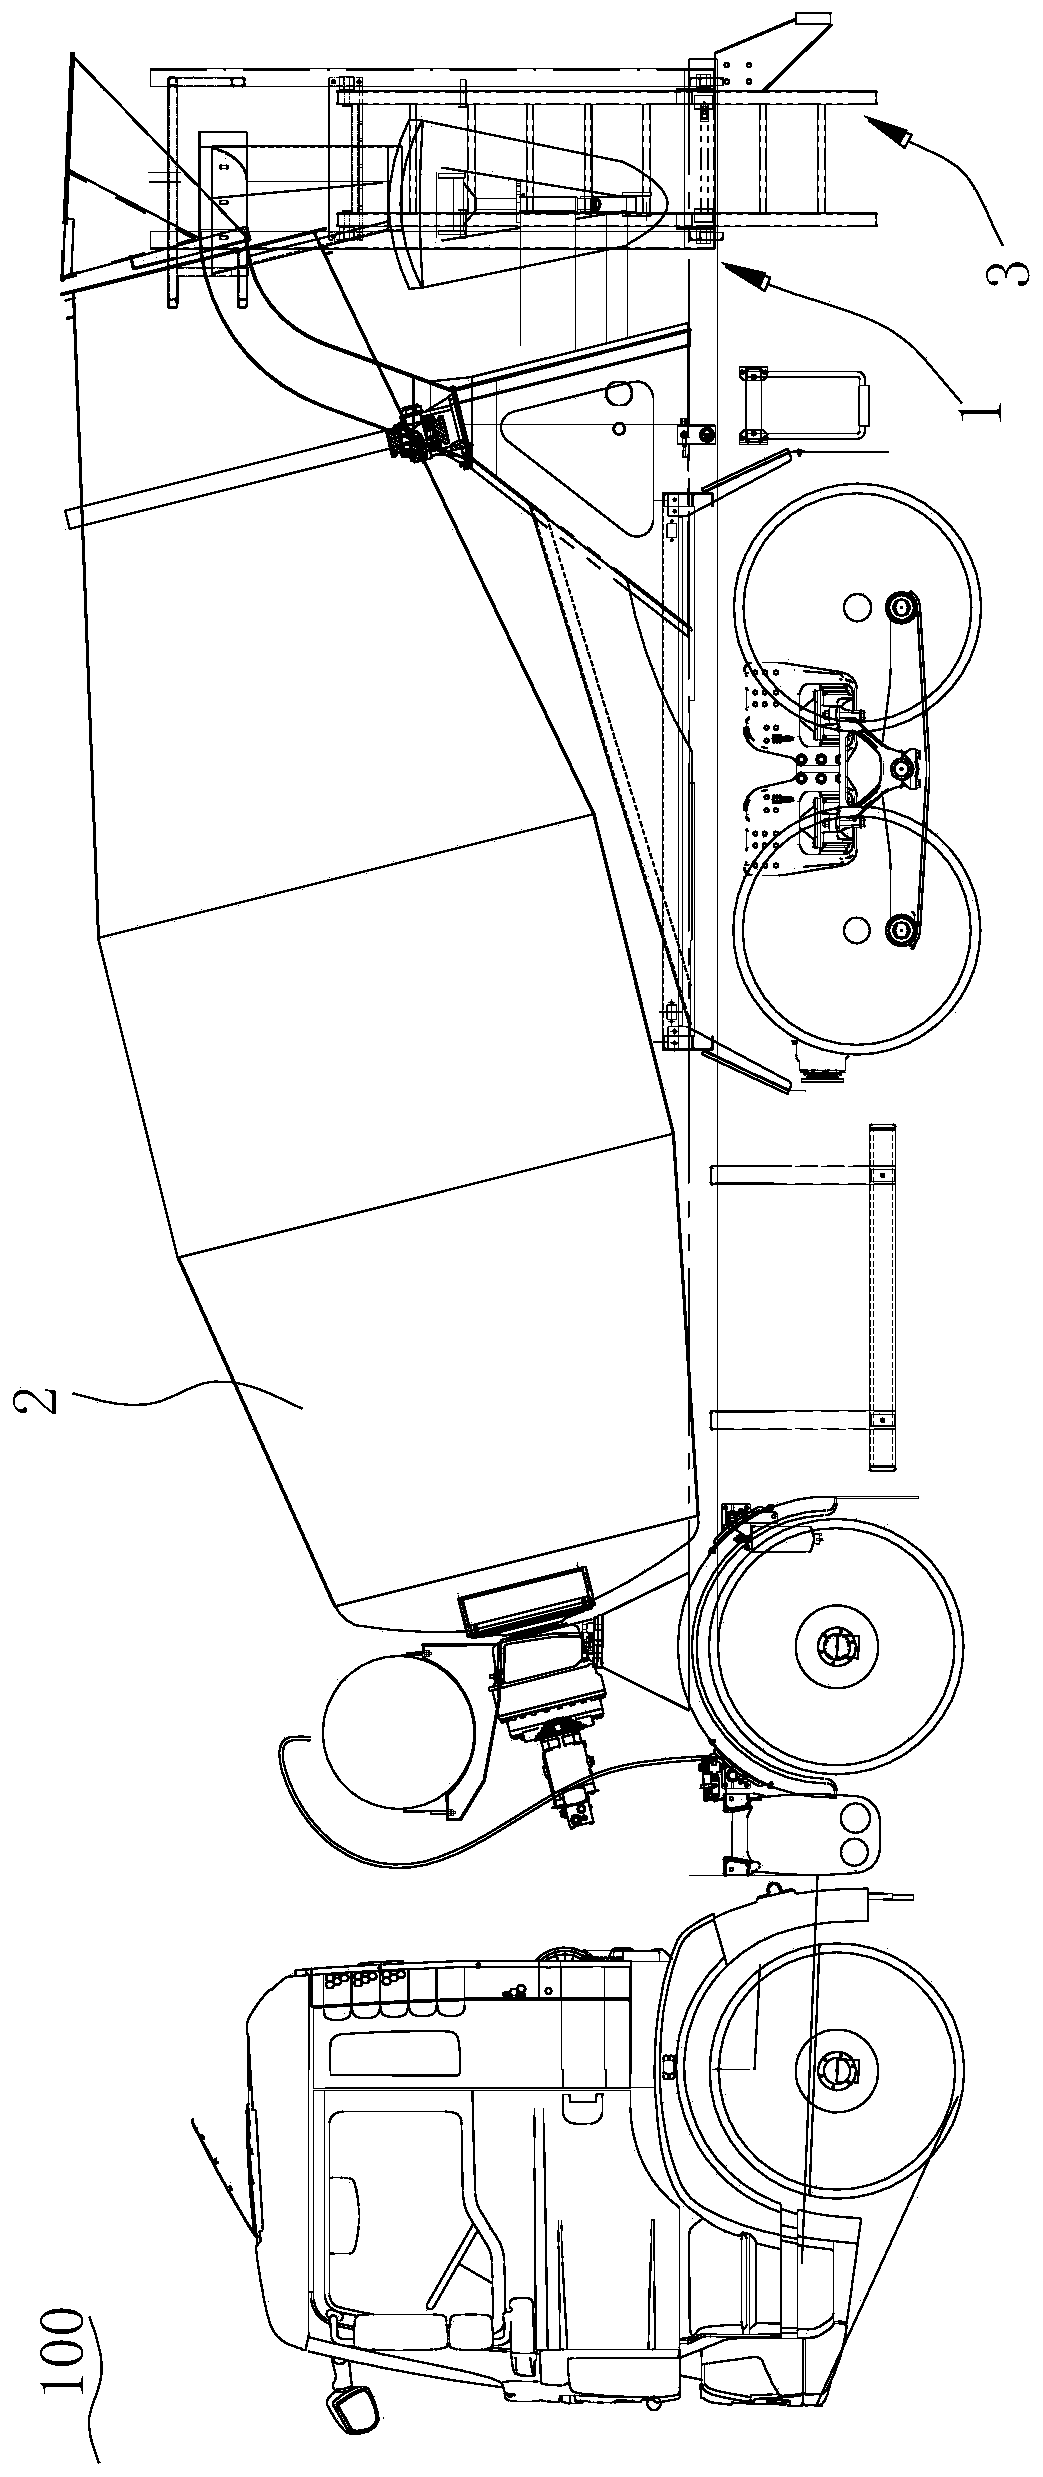 Mixer truck and crawling ladder device thereof